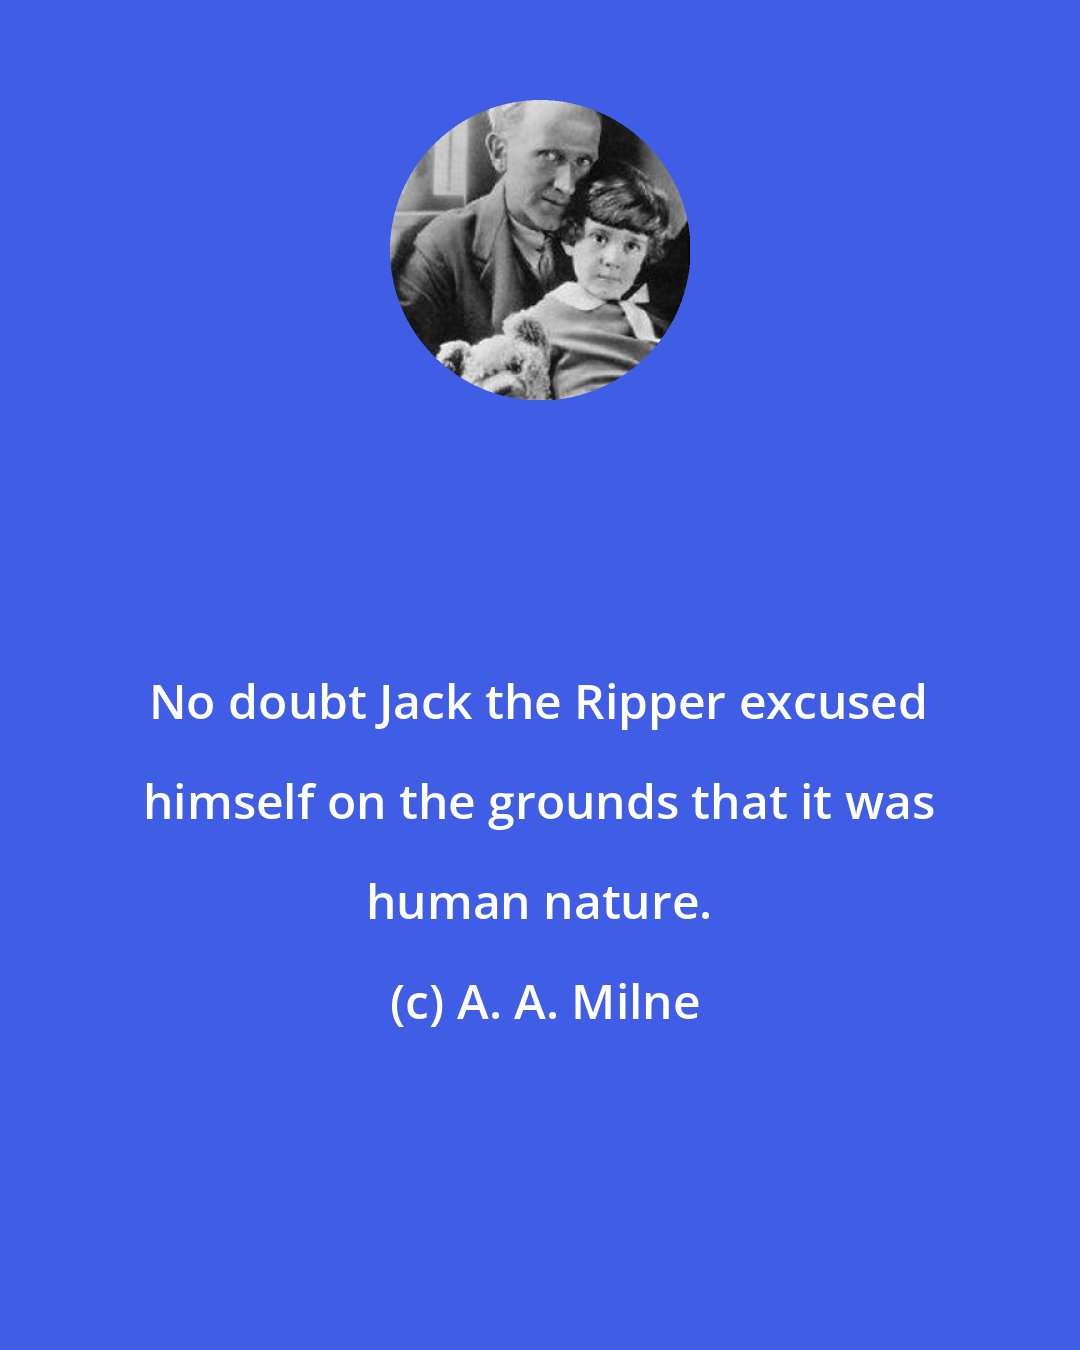 A. A. Milne: No doubt Jack the Ripper excused himself on the grounds that it was human nature.